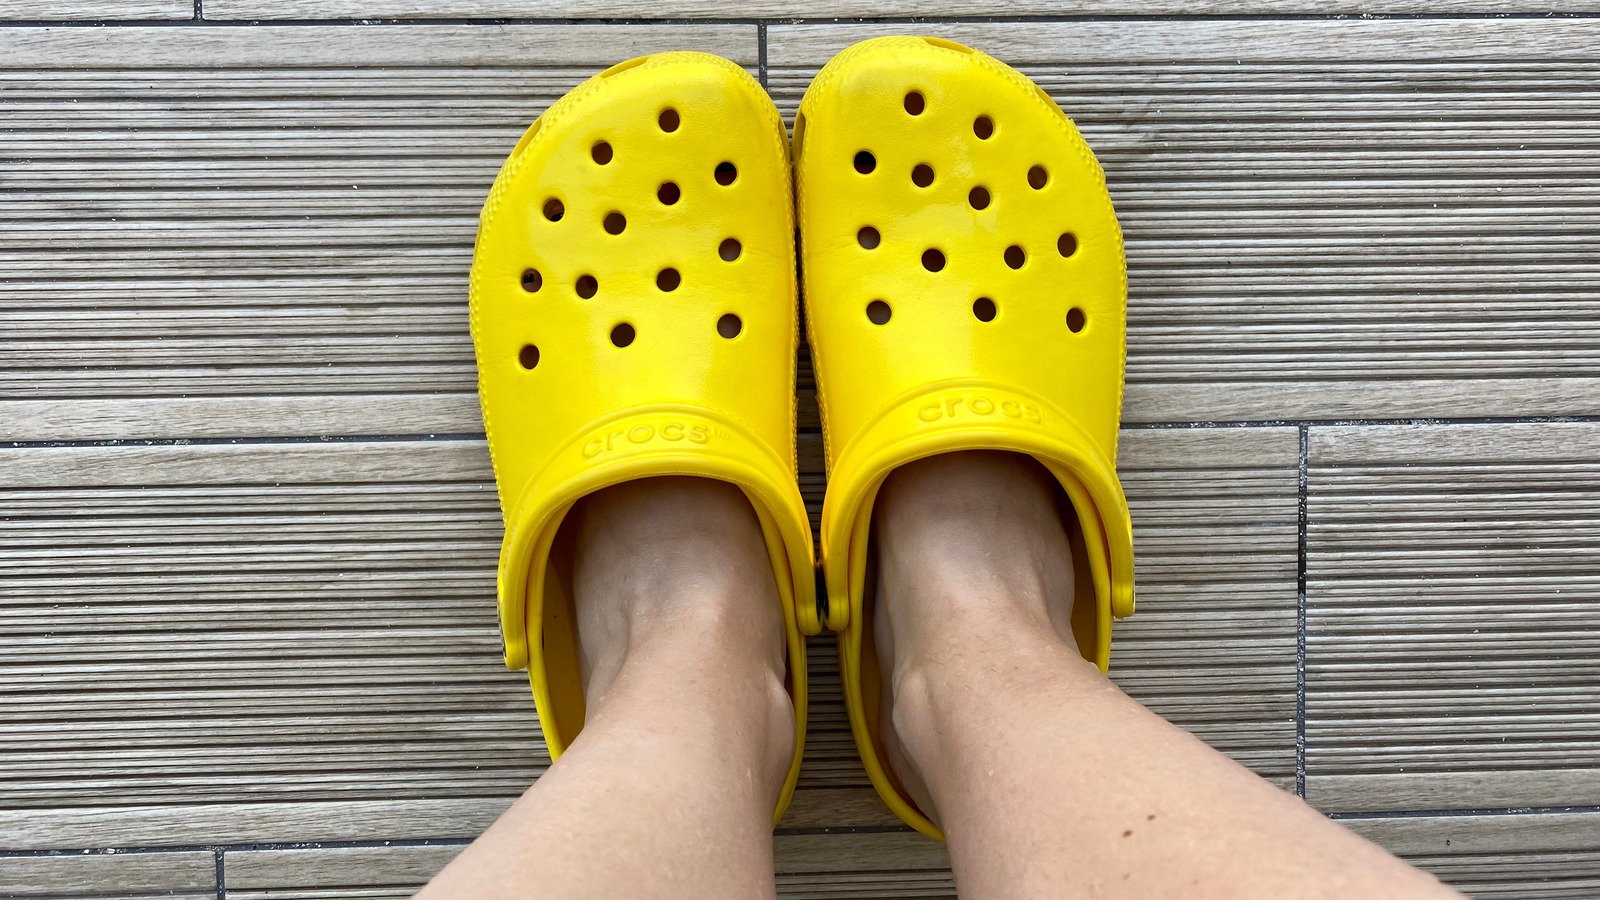 Crocs Shoes Review: I joined the Crocs bandwagon. Here's why you should too